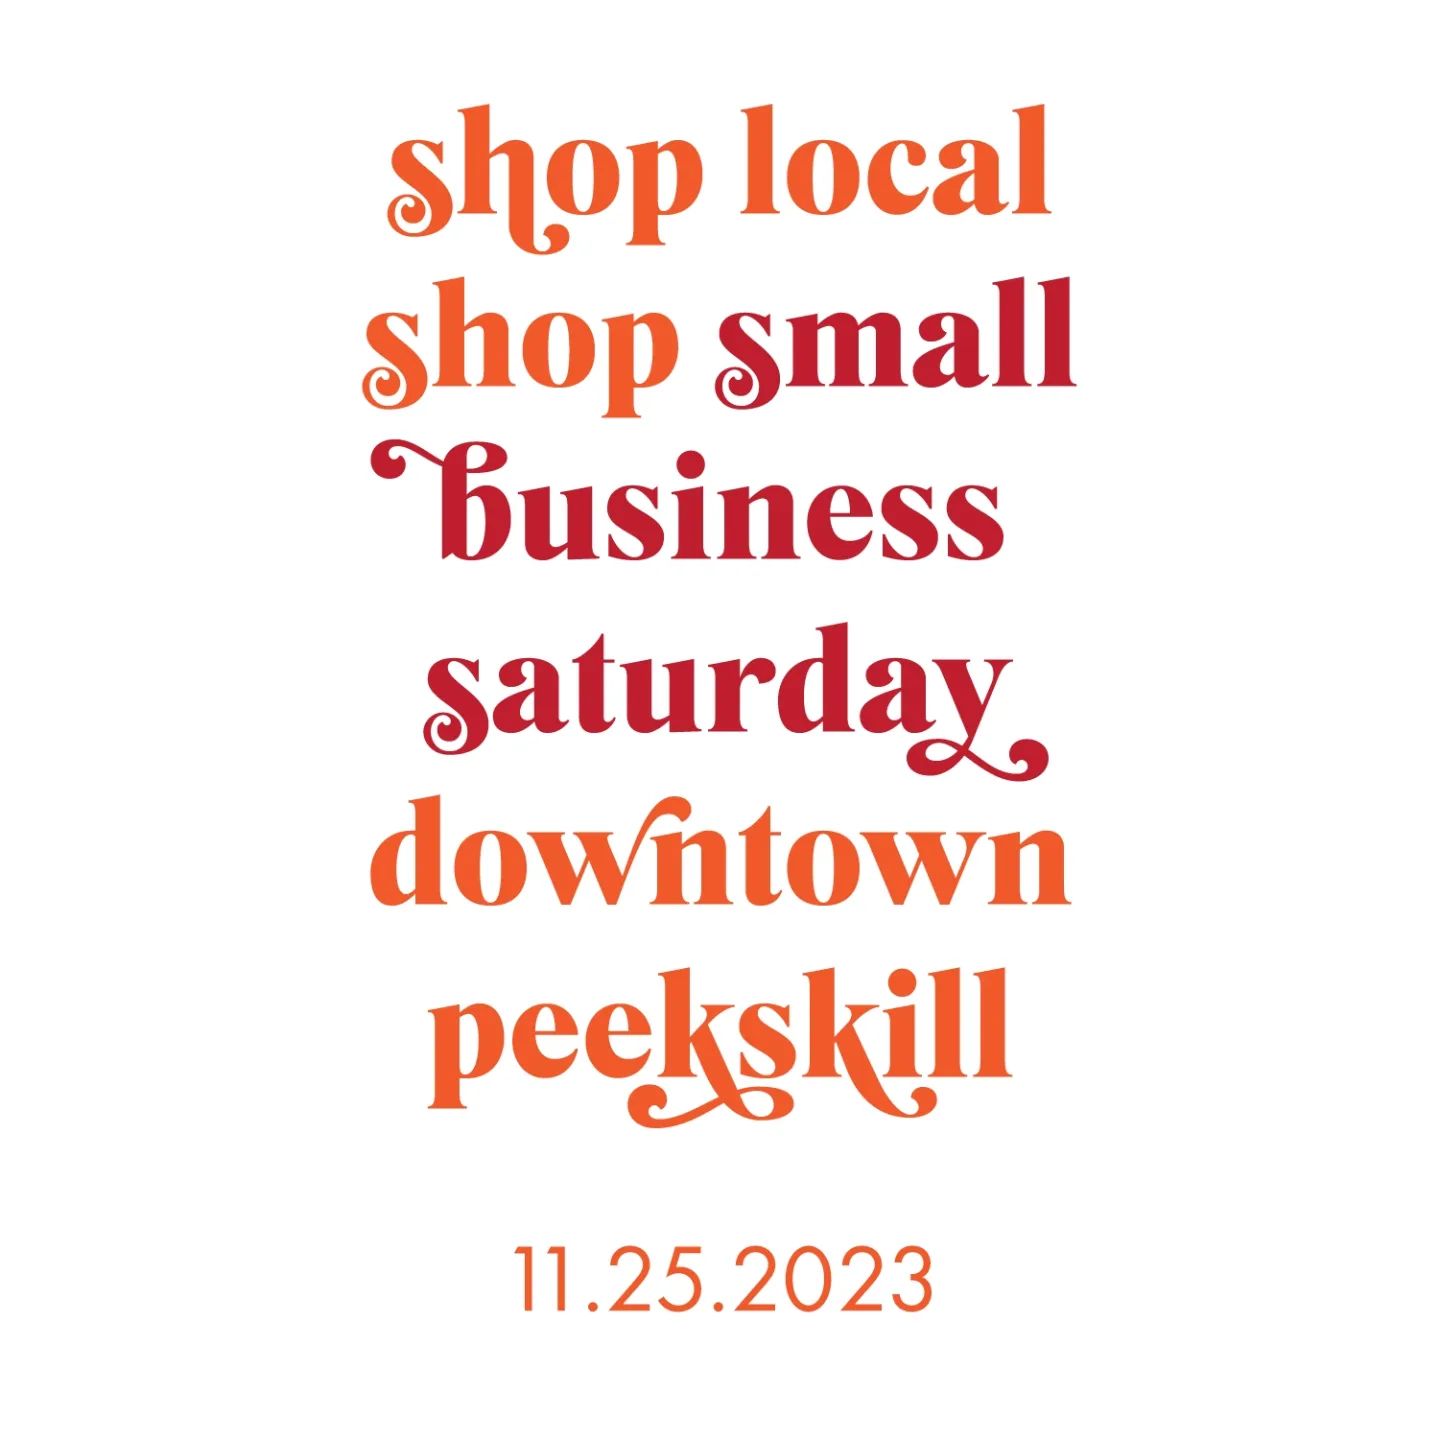 Flyer for Small Business Saturday in Downtown Peekskill